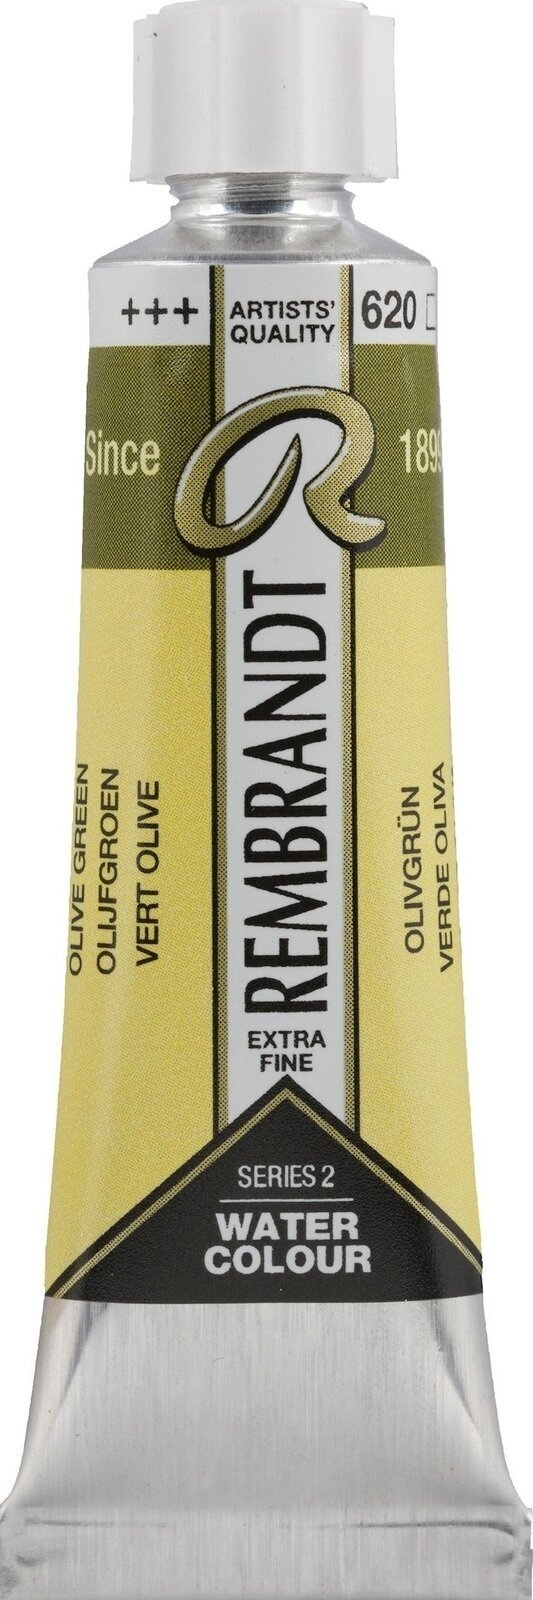 Nερομπογιά Rembrandt Watercolour Paint 10 ml Olive Green